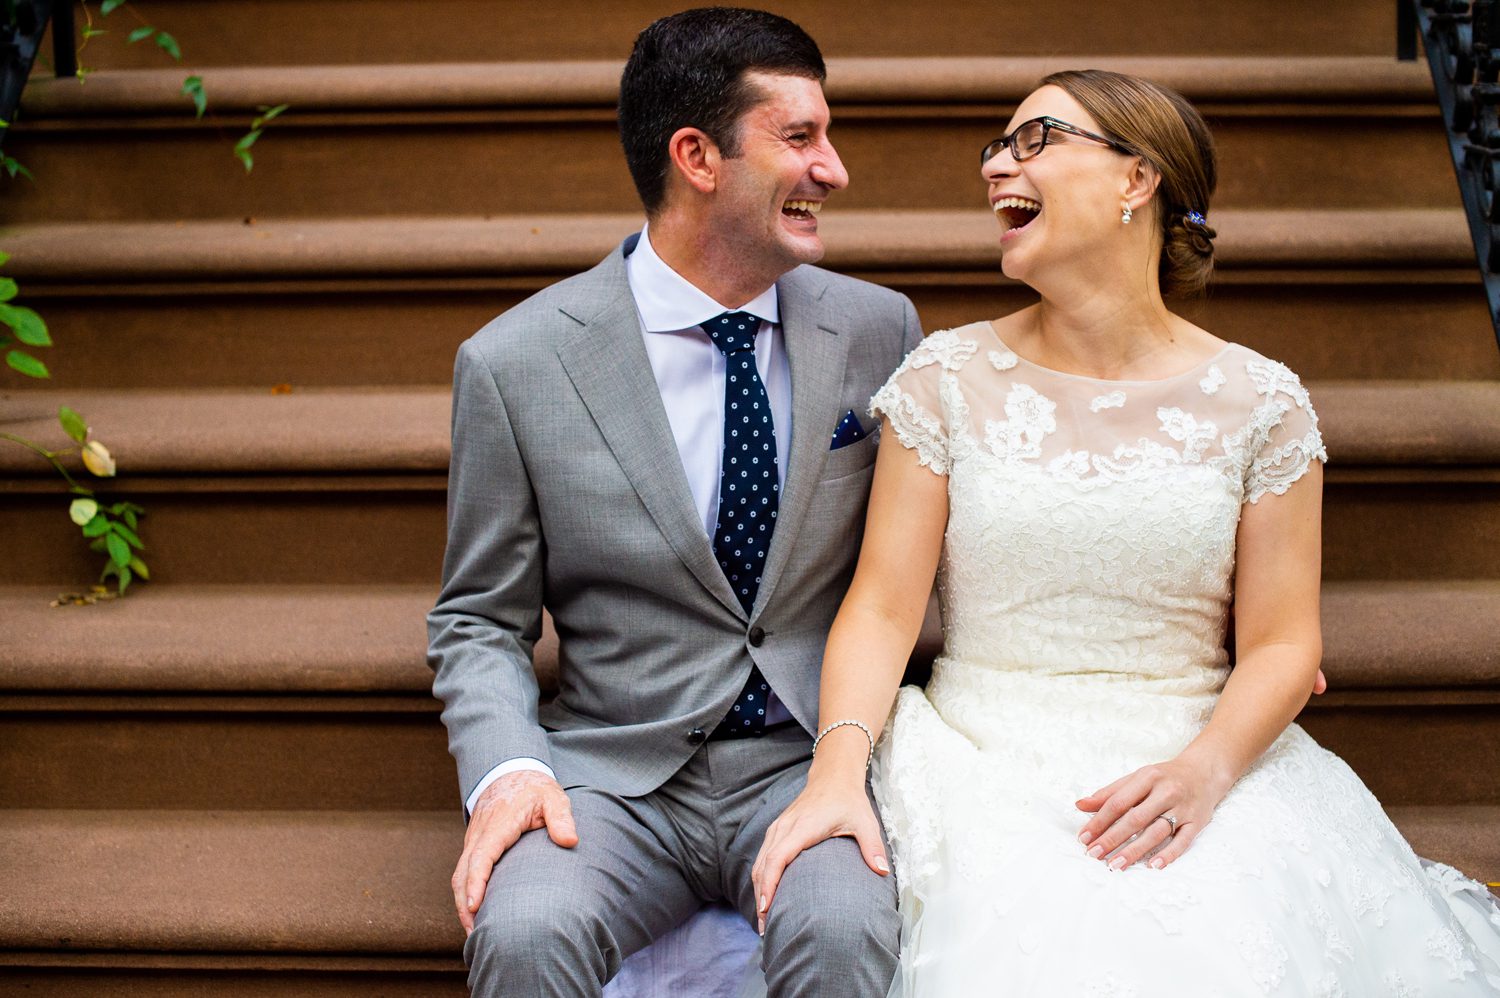 Where to Elope in NYC